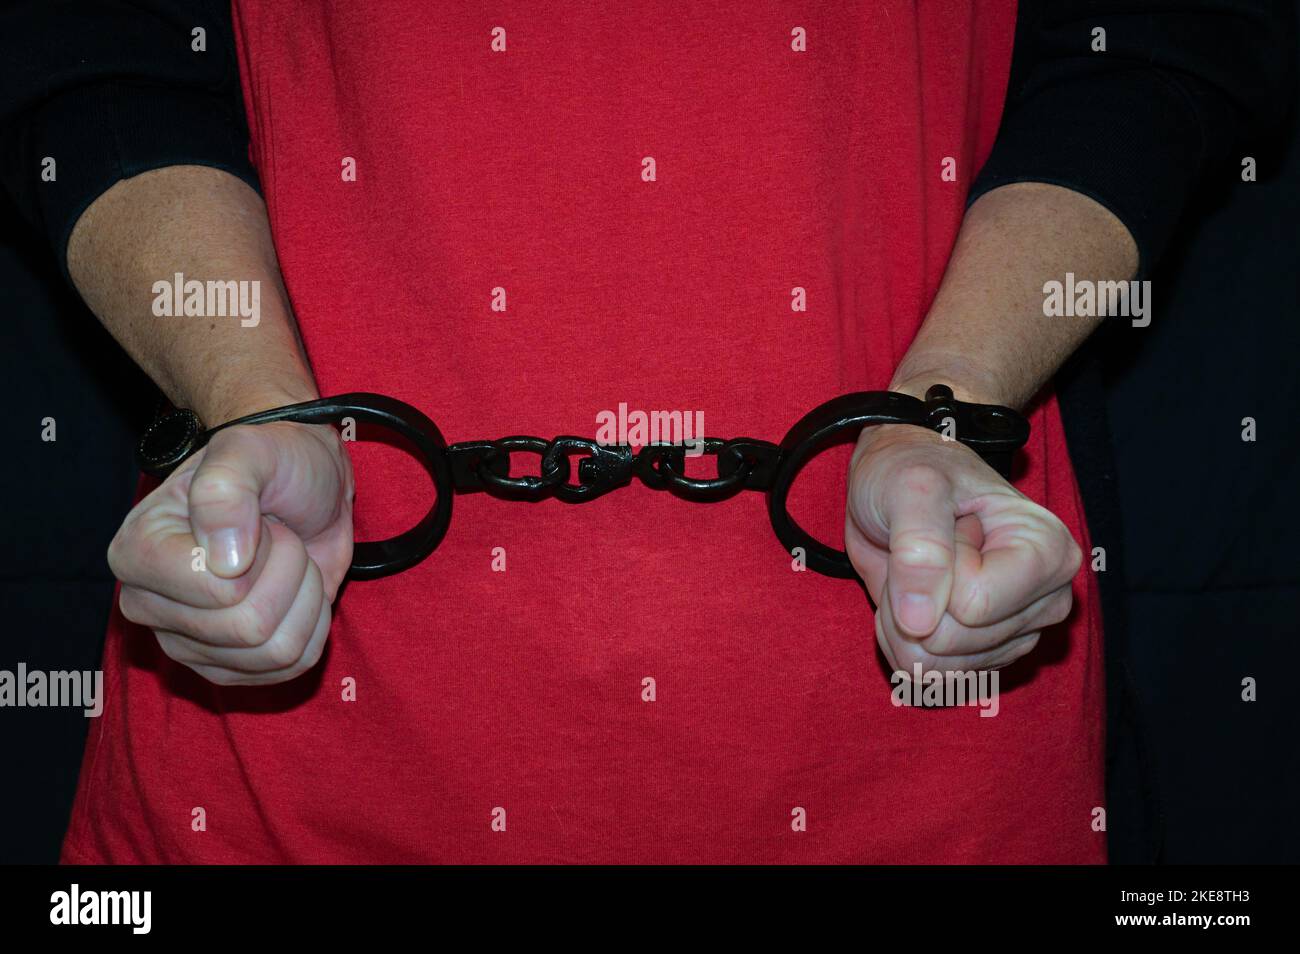 Photo of a pair of women's hands with iron shackles in front of a red shirt. Stock Photo